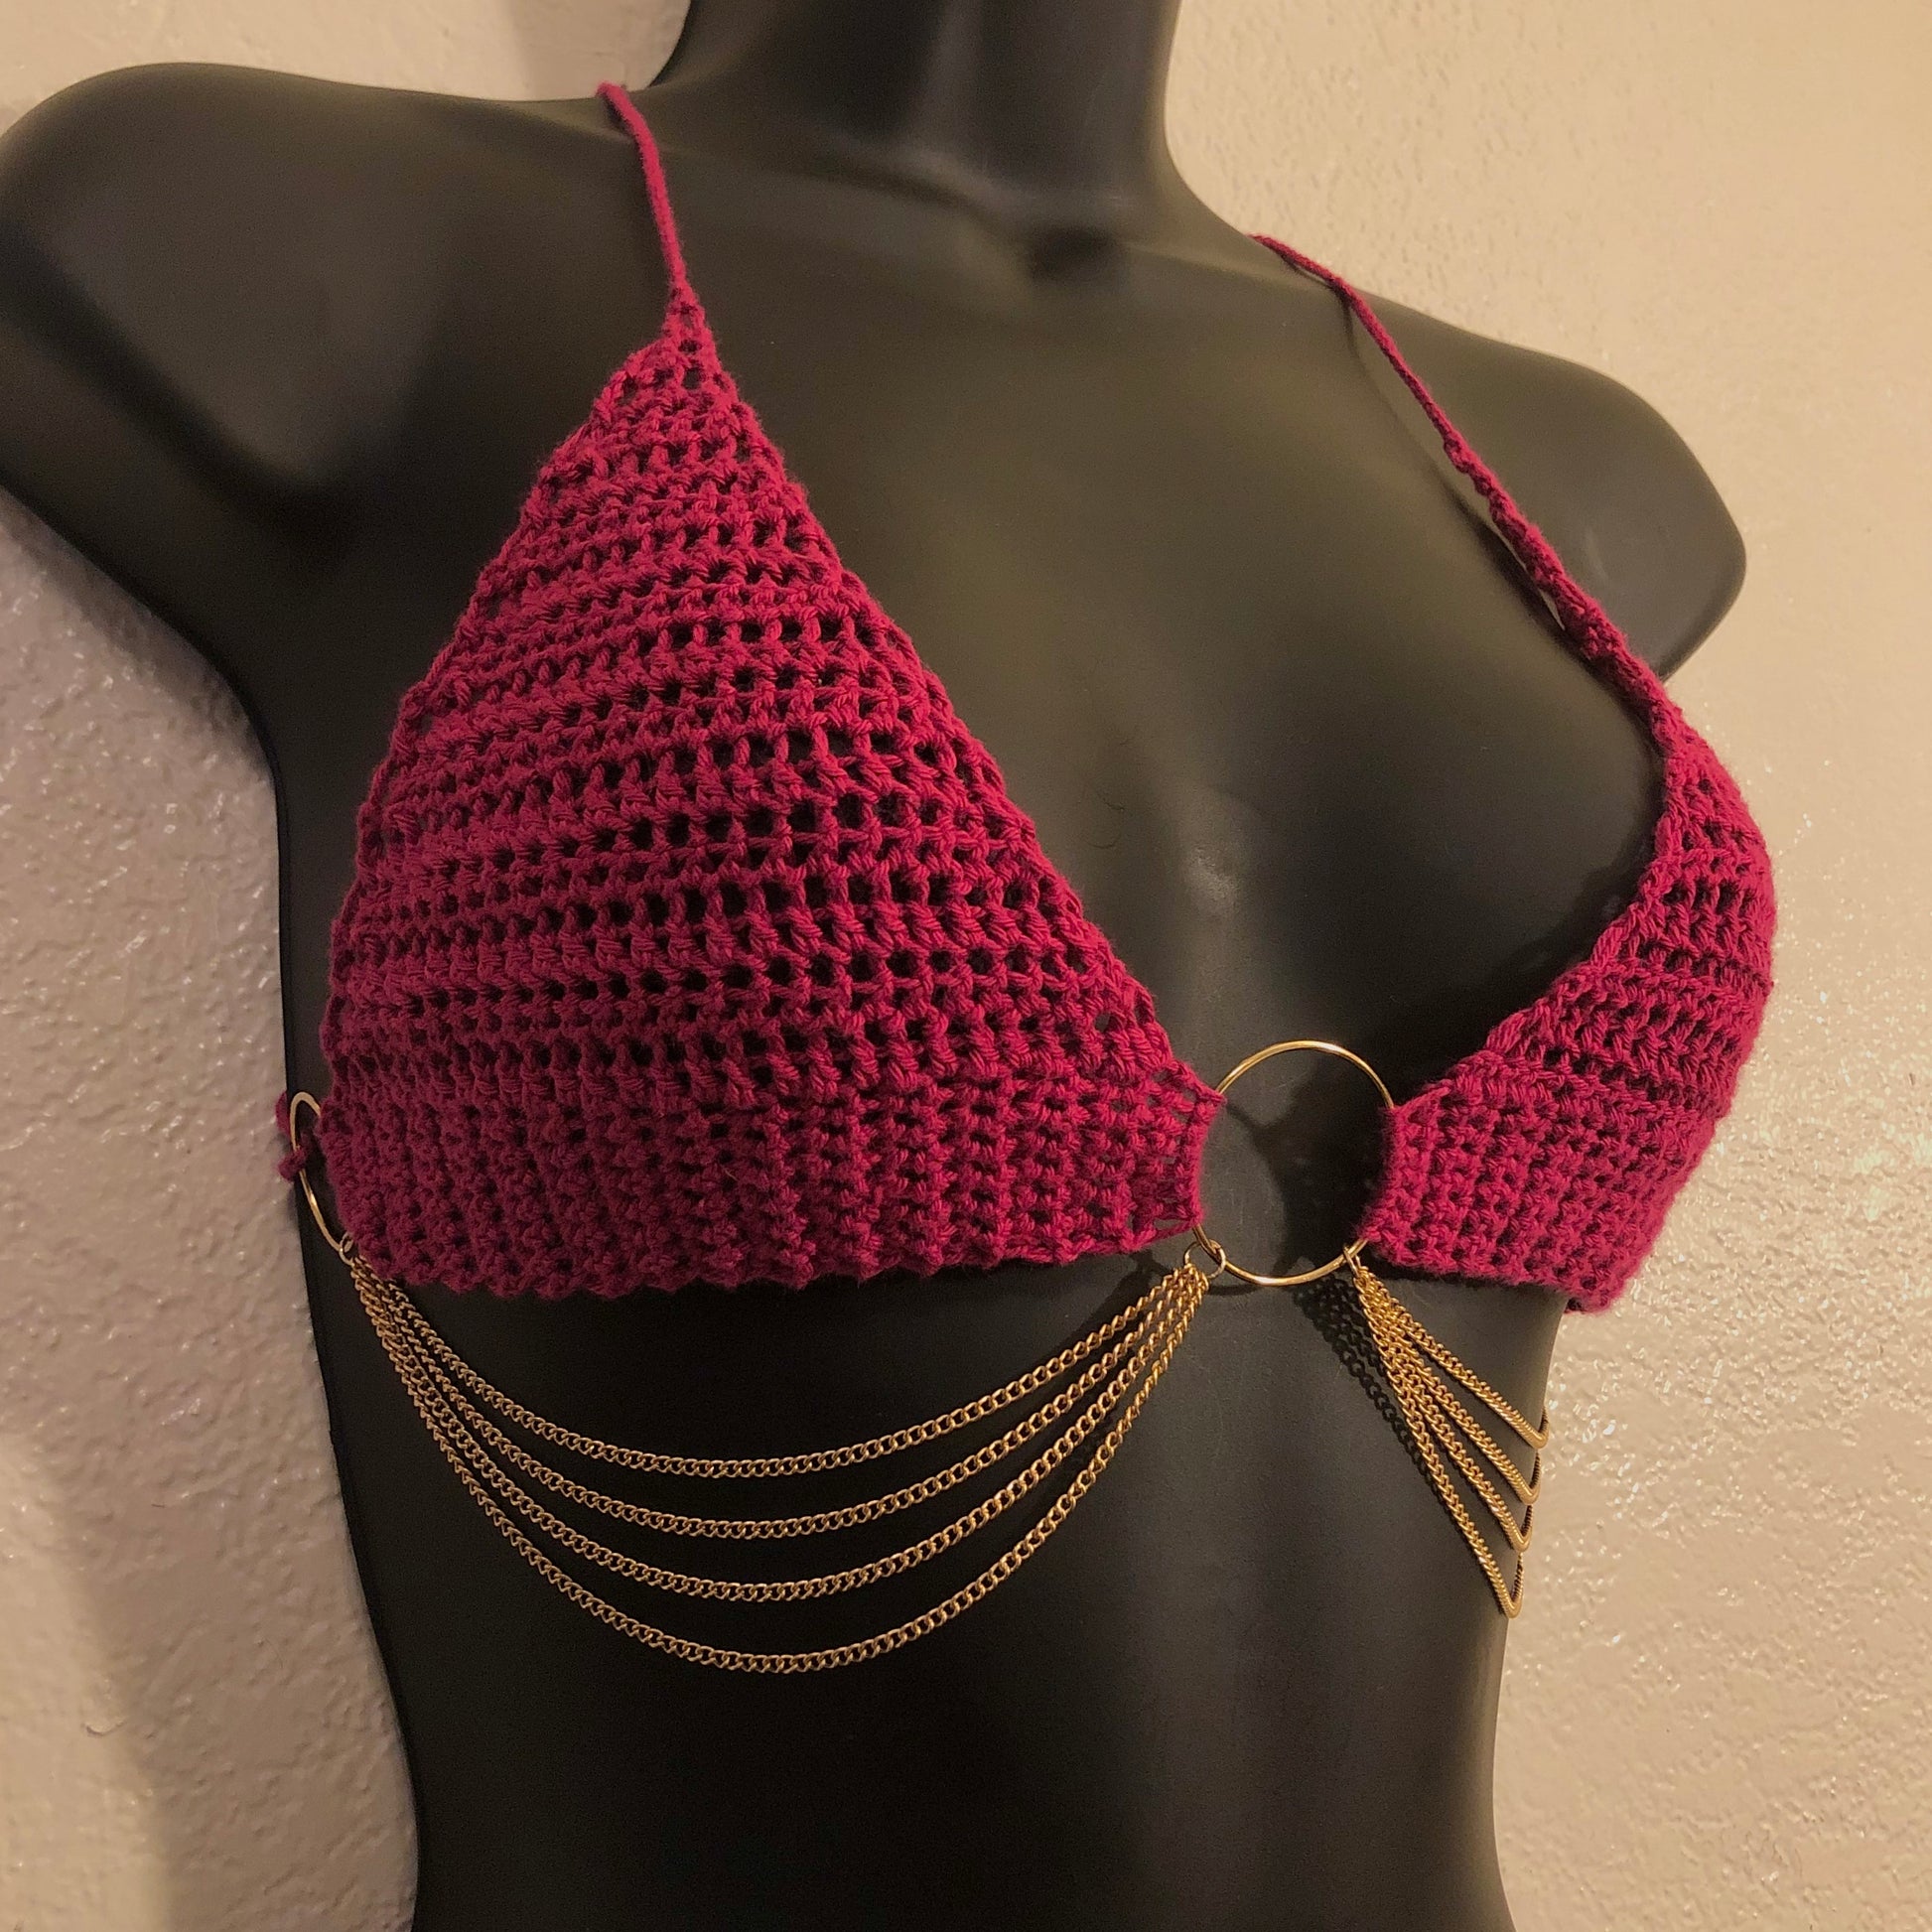 Crocheted halter top made with a lightweight cotton yarn in the color raspberry. Embellished with nickel-free gold colored rings and chains. 